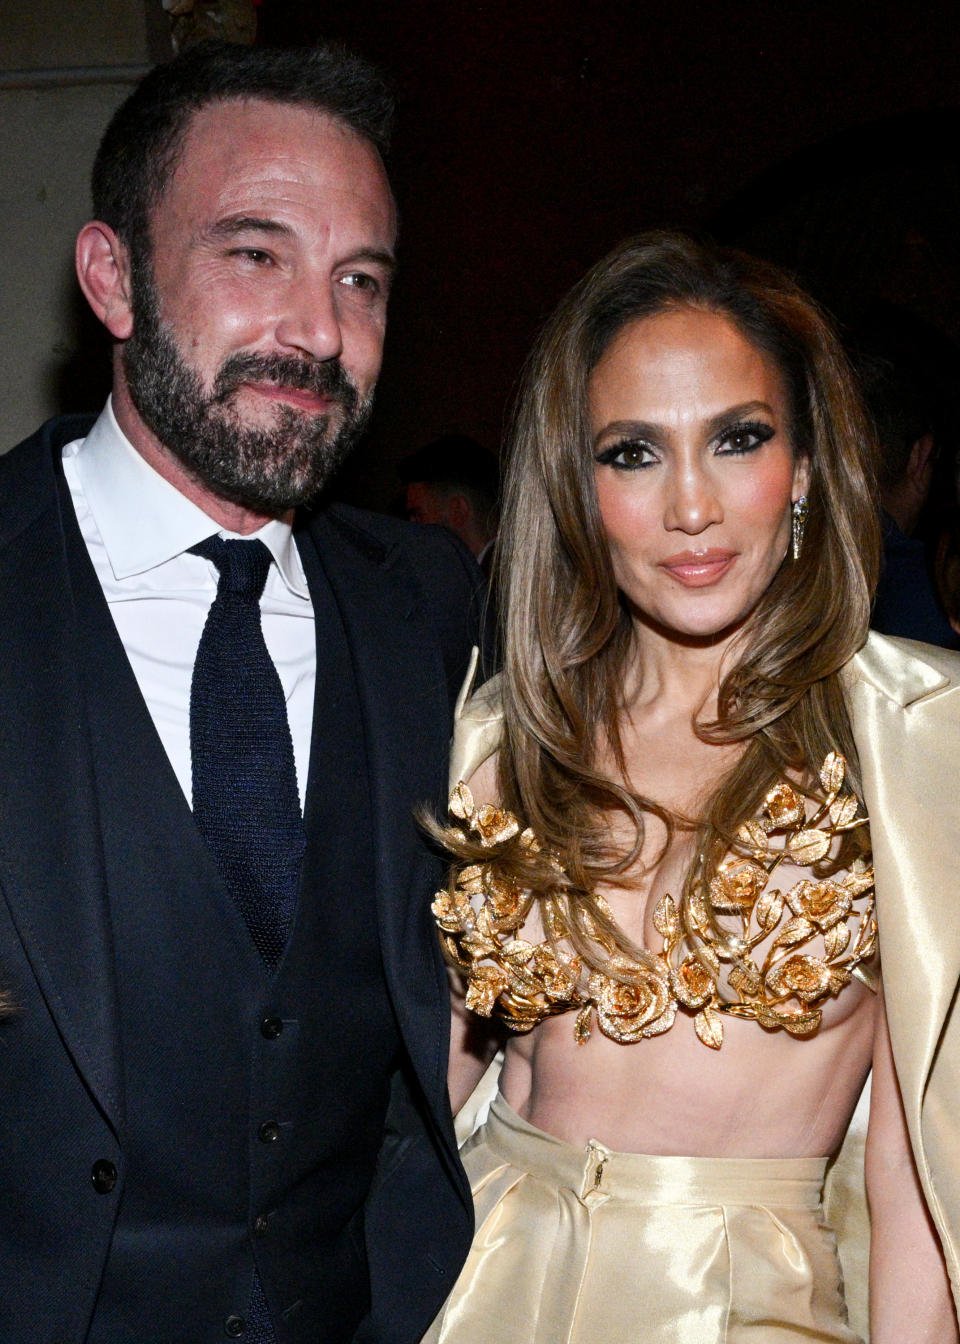 Ben Affleck and Jennifer Lopez at the premiere of "This Is Me... Now: A Love Story" held at Dolby Theatre on February 13, 2024 in Los Angeles, California. (Photo by Michael Buckner/Variety via Getty Images)